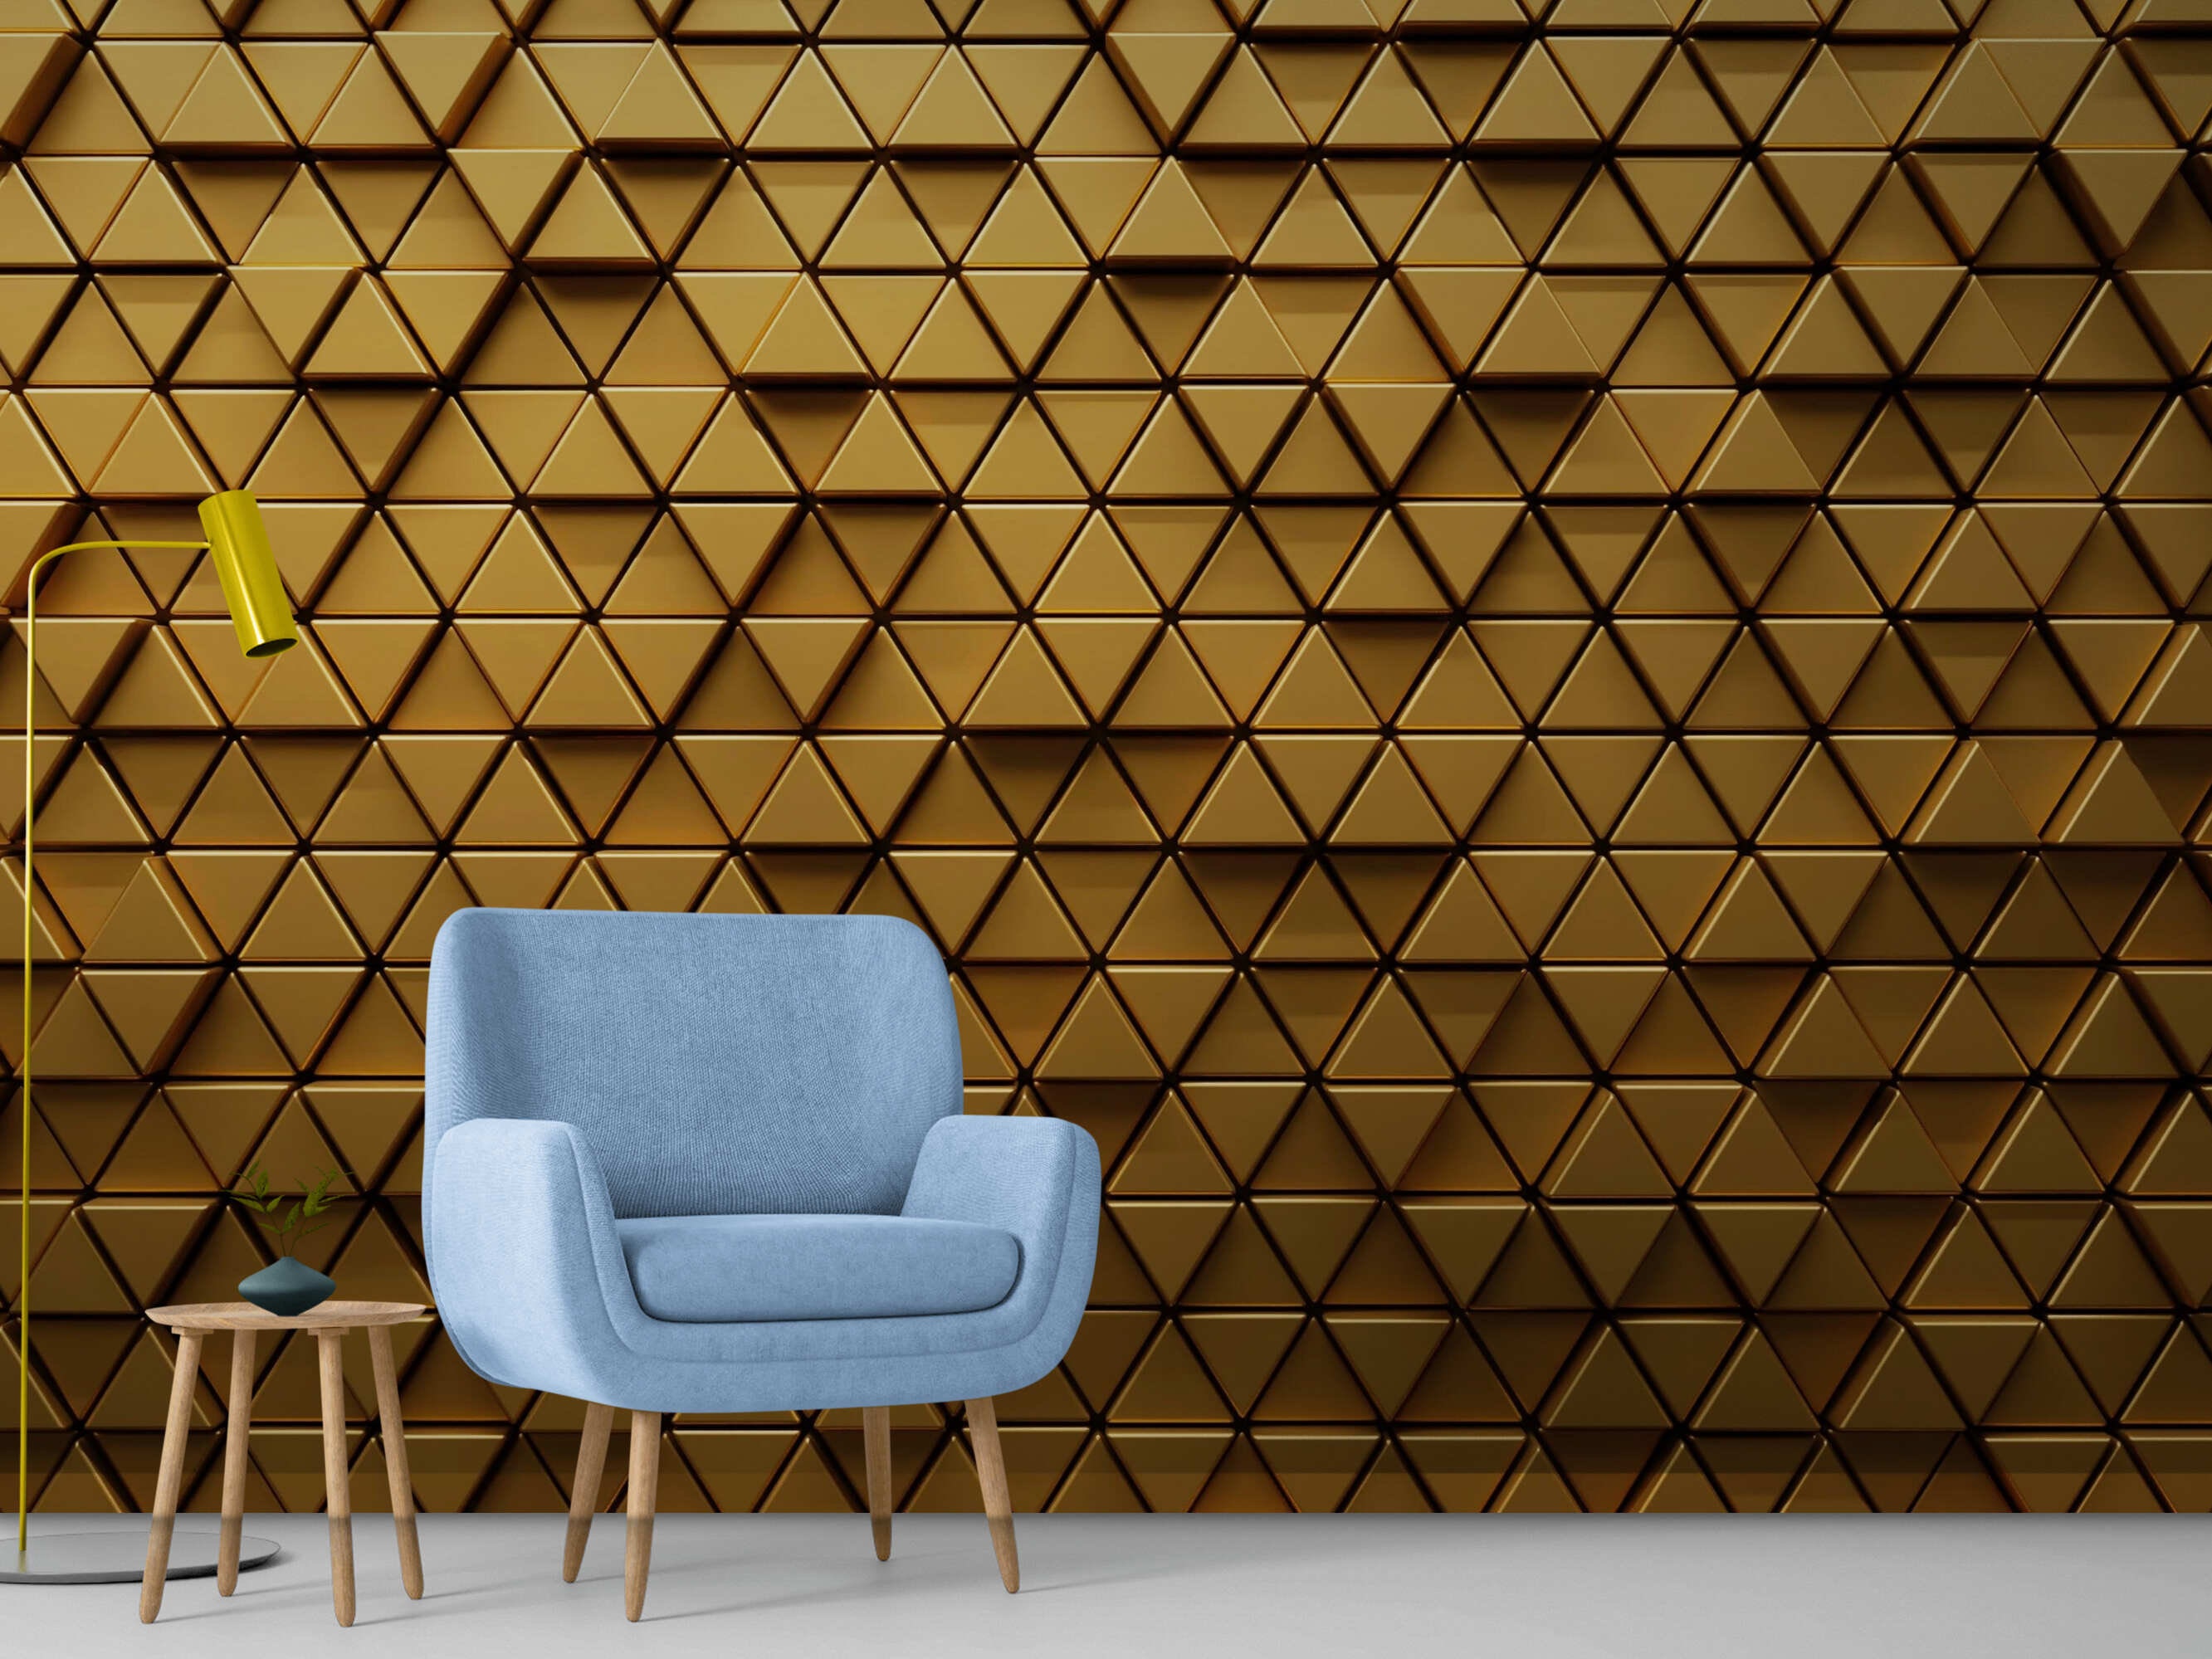 Luxury 3D Wallpaper Gold Wall Mural Self-adhesive Removable - Etsy